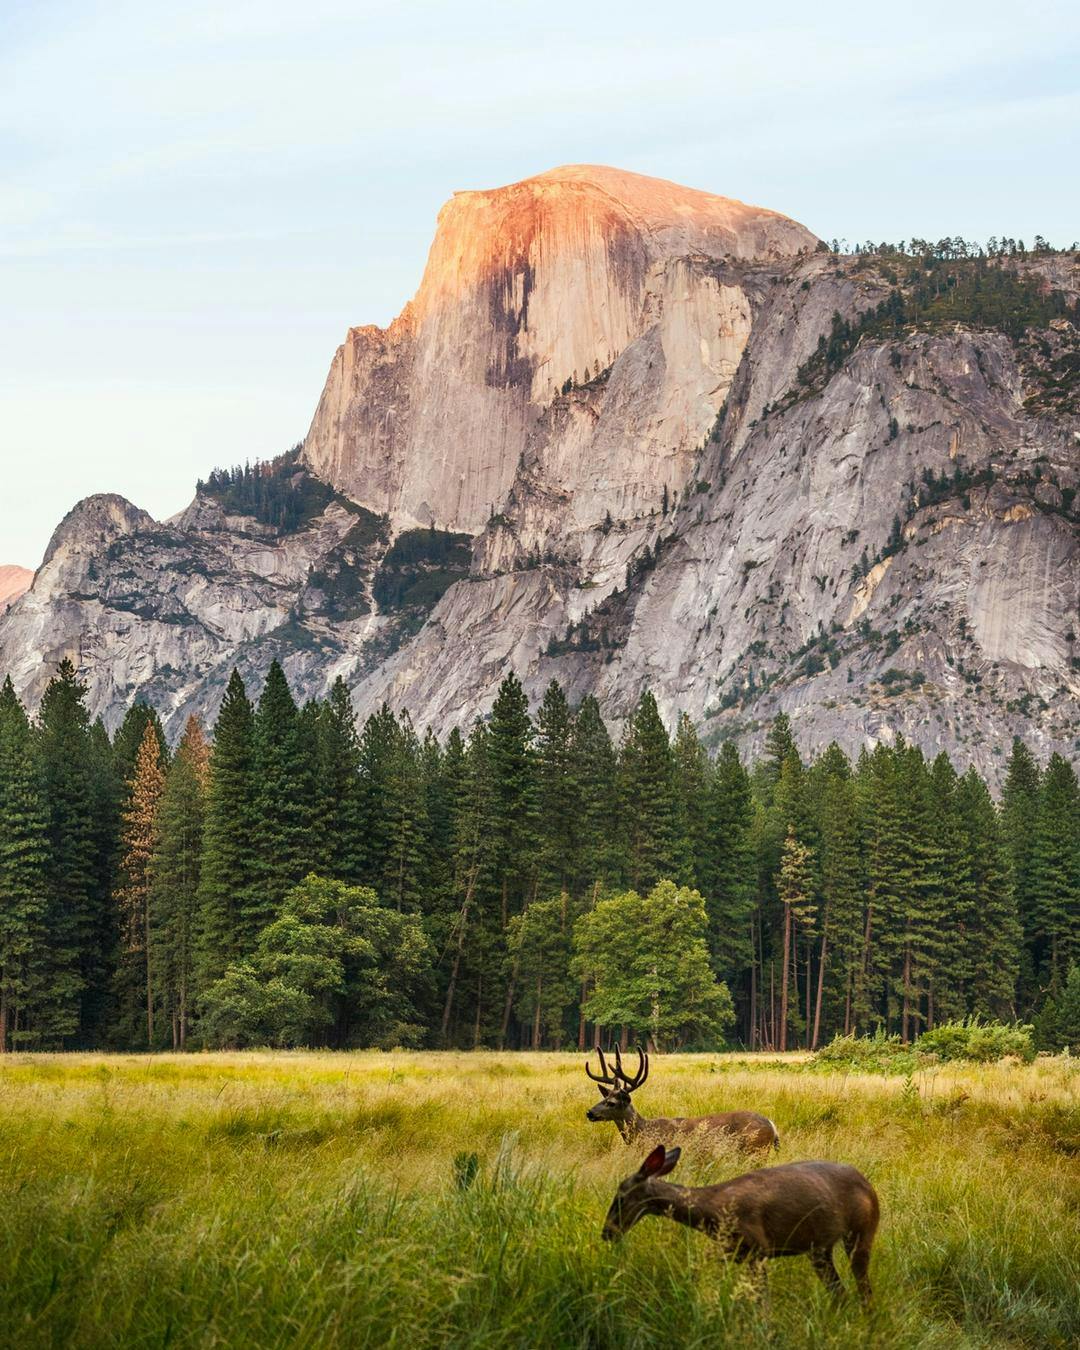 Two deers grazing in front of Crested Butte at Yosemite National Park.